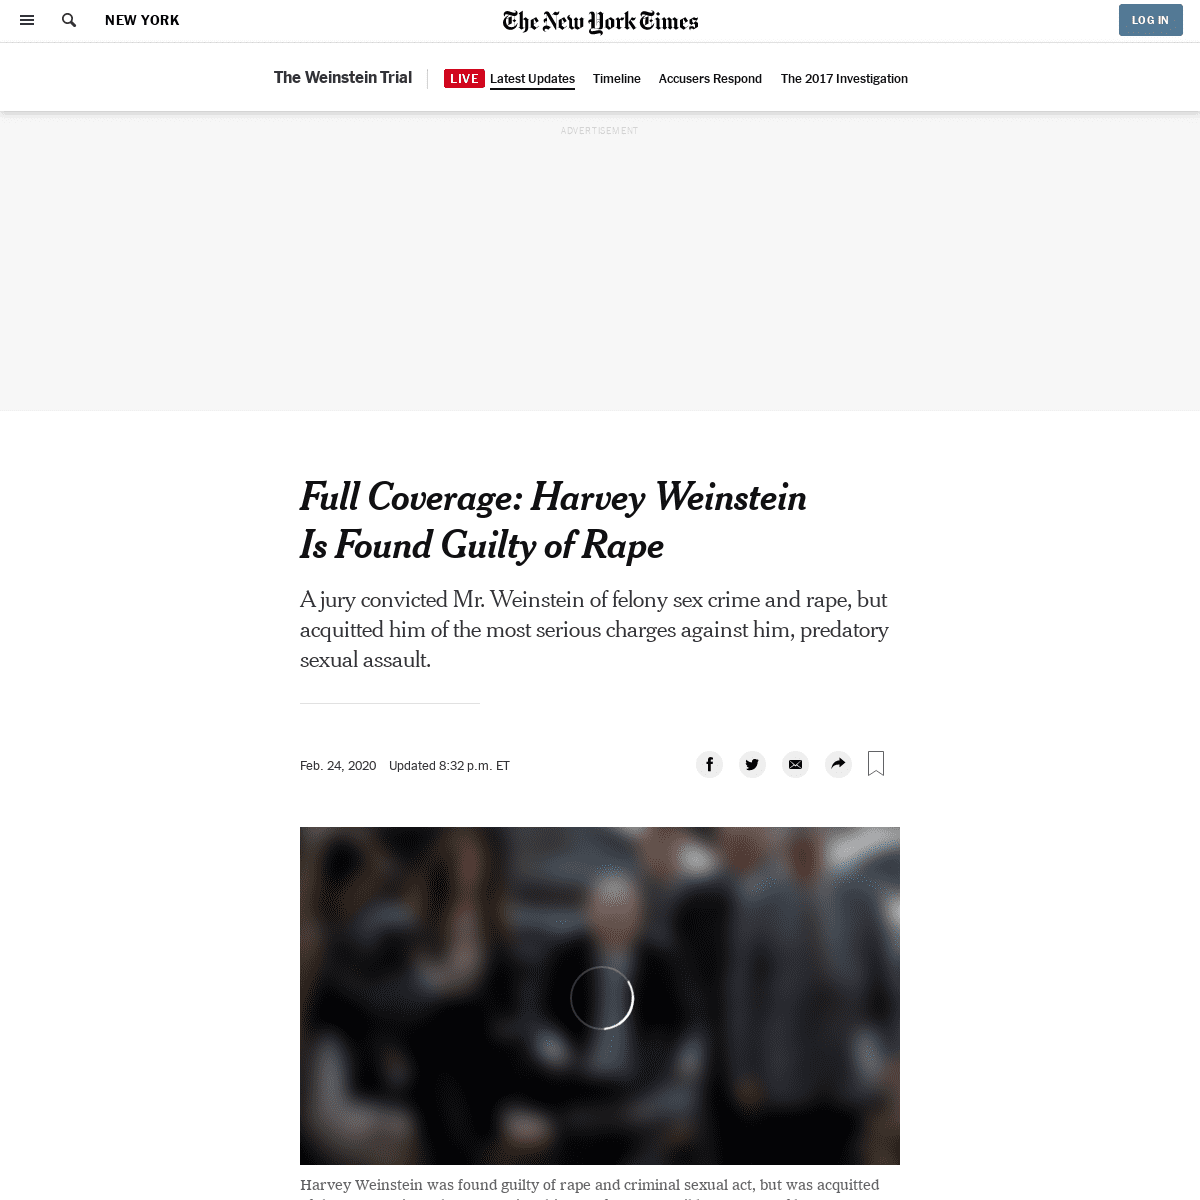 A complete backup of www.nytimes.com/2020/02/24/nyregion/harvey-weinstein-verdict.html